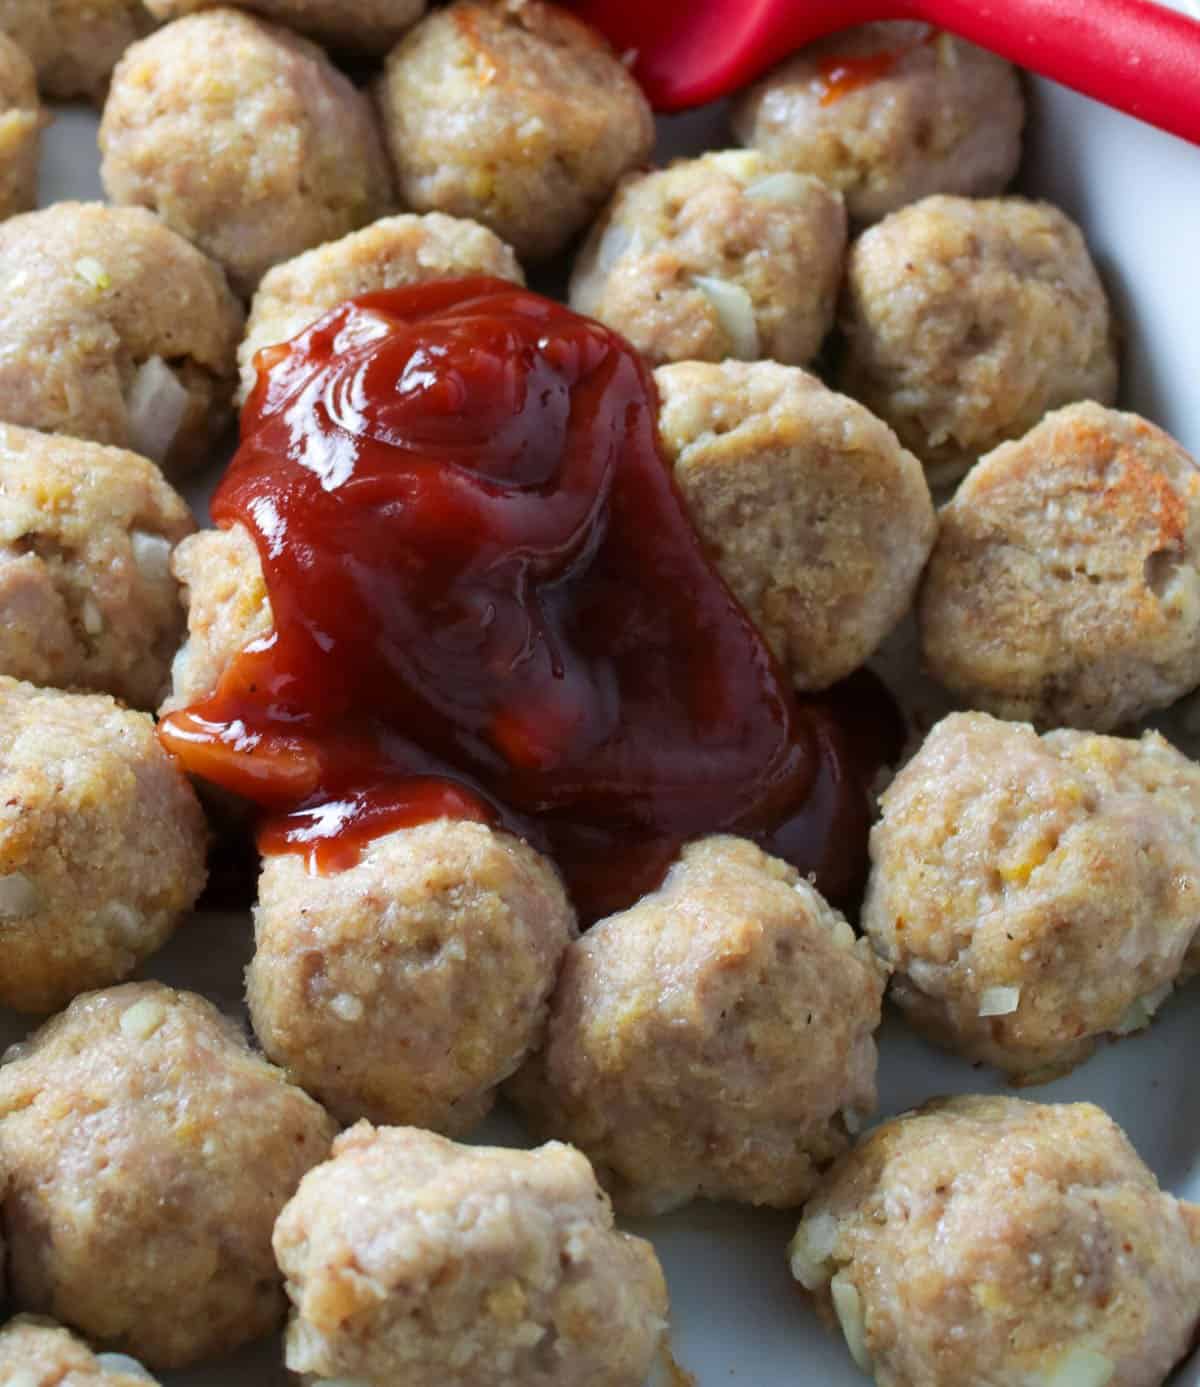 The sauce poured into the meatballs.